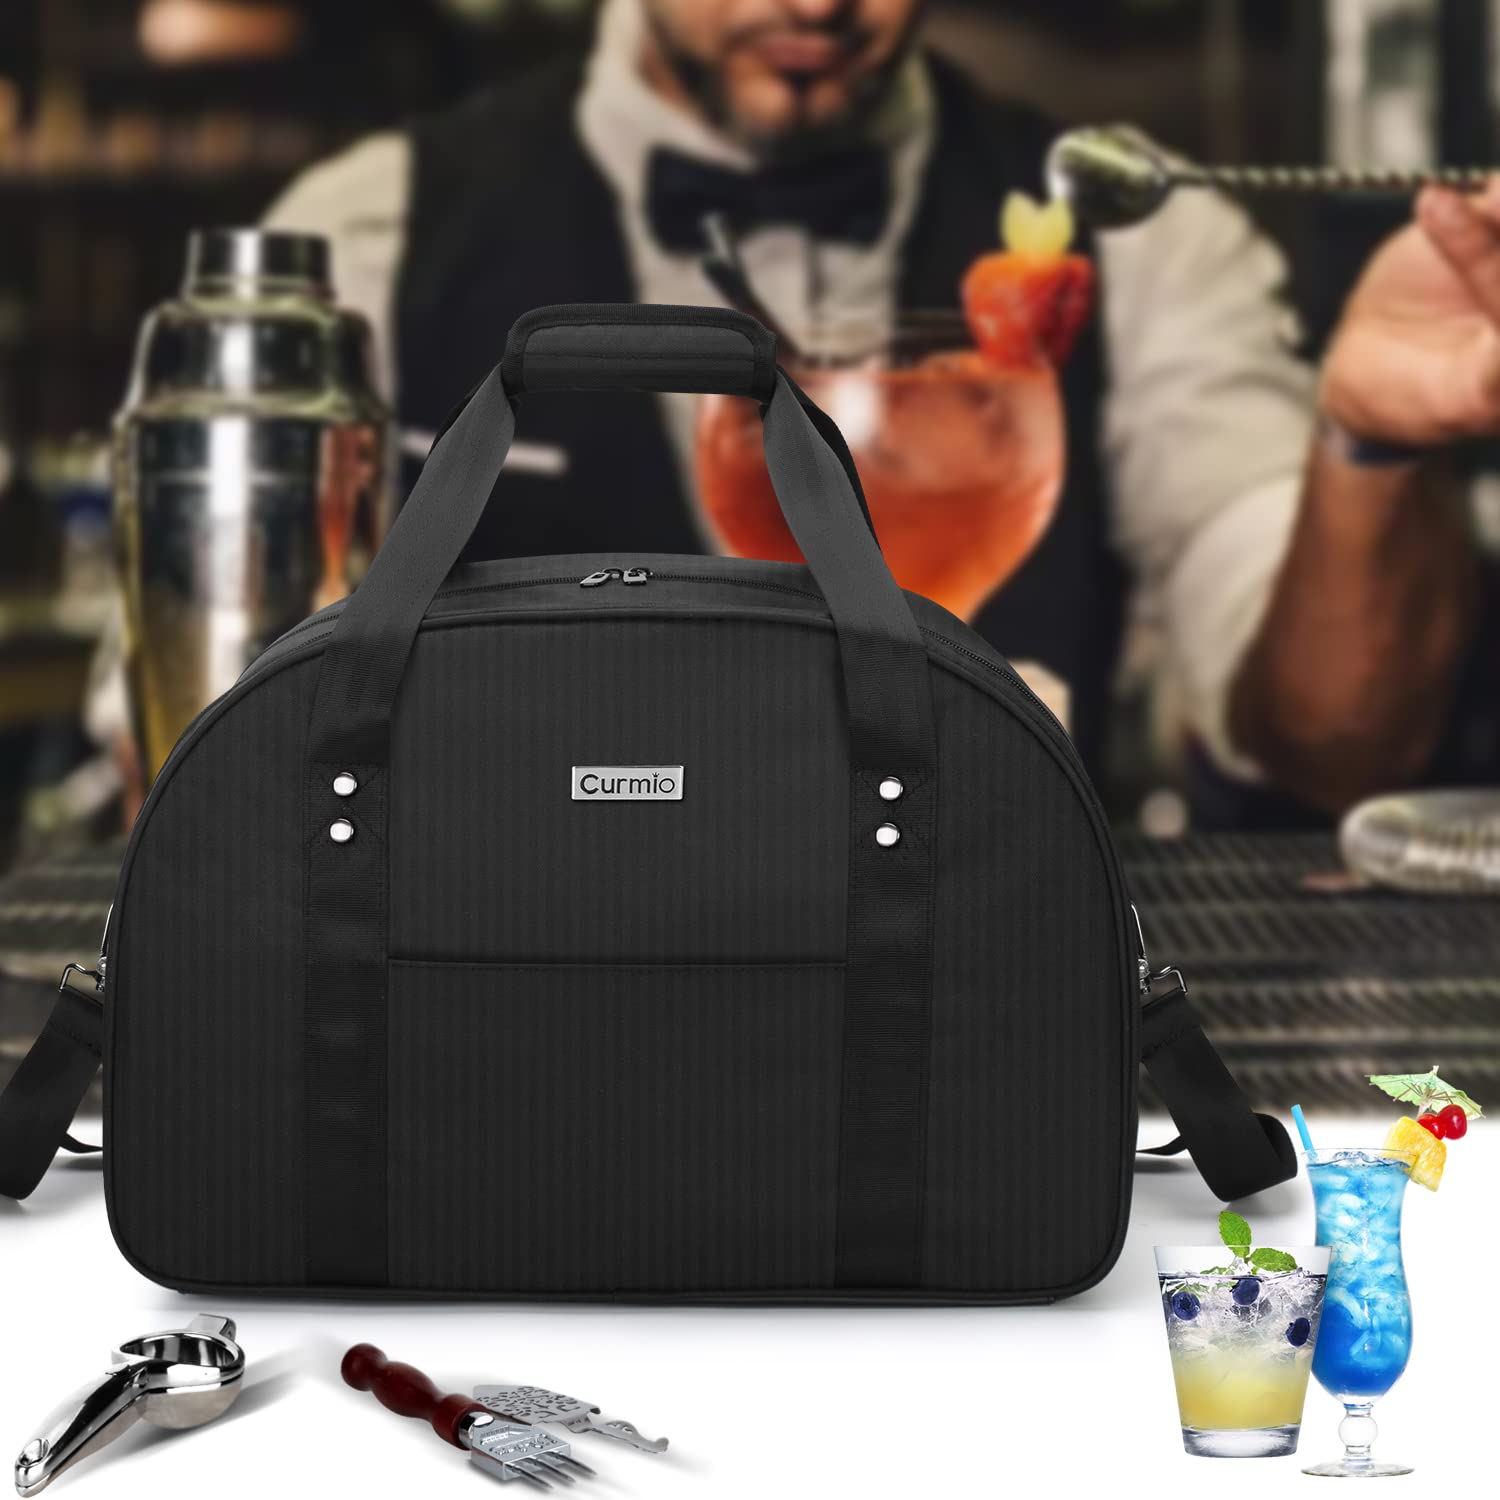 CURMIO Bartender Kit Travel Carrying Bag with Padded Compartment for Wine and Bar Tools Set, Bartender Shoulder Tote Bag for Home Indoor Outdoor Patio Party, Black, BAG ONLY, Patent Pending